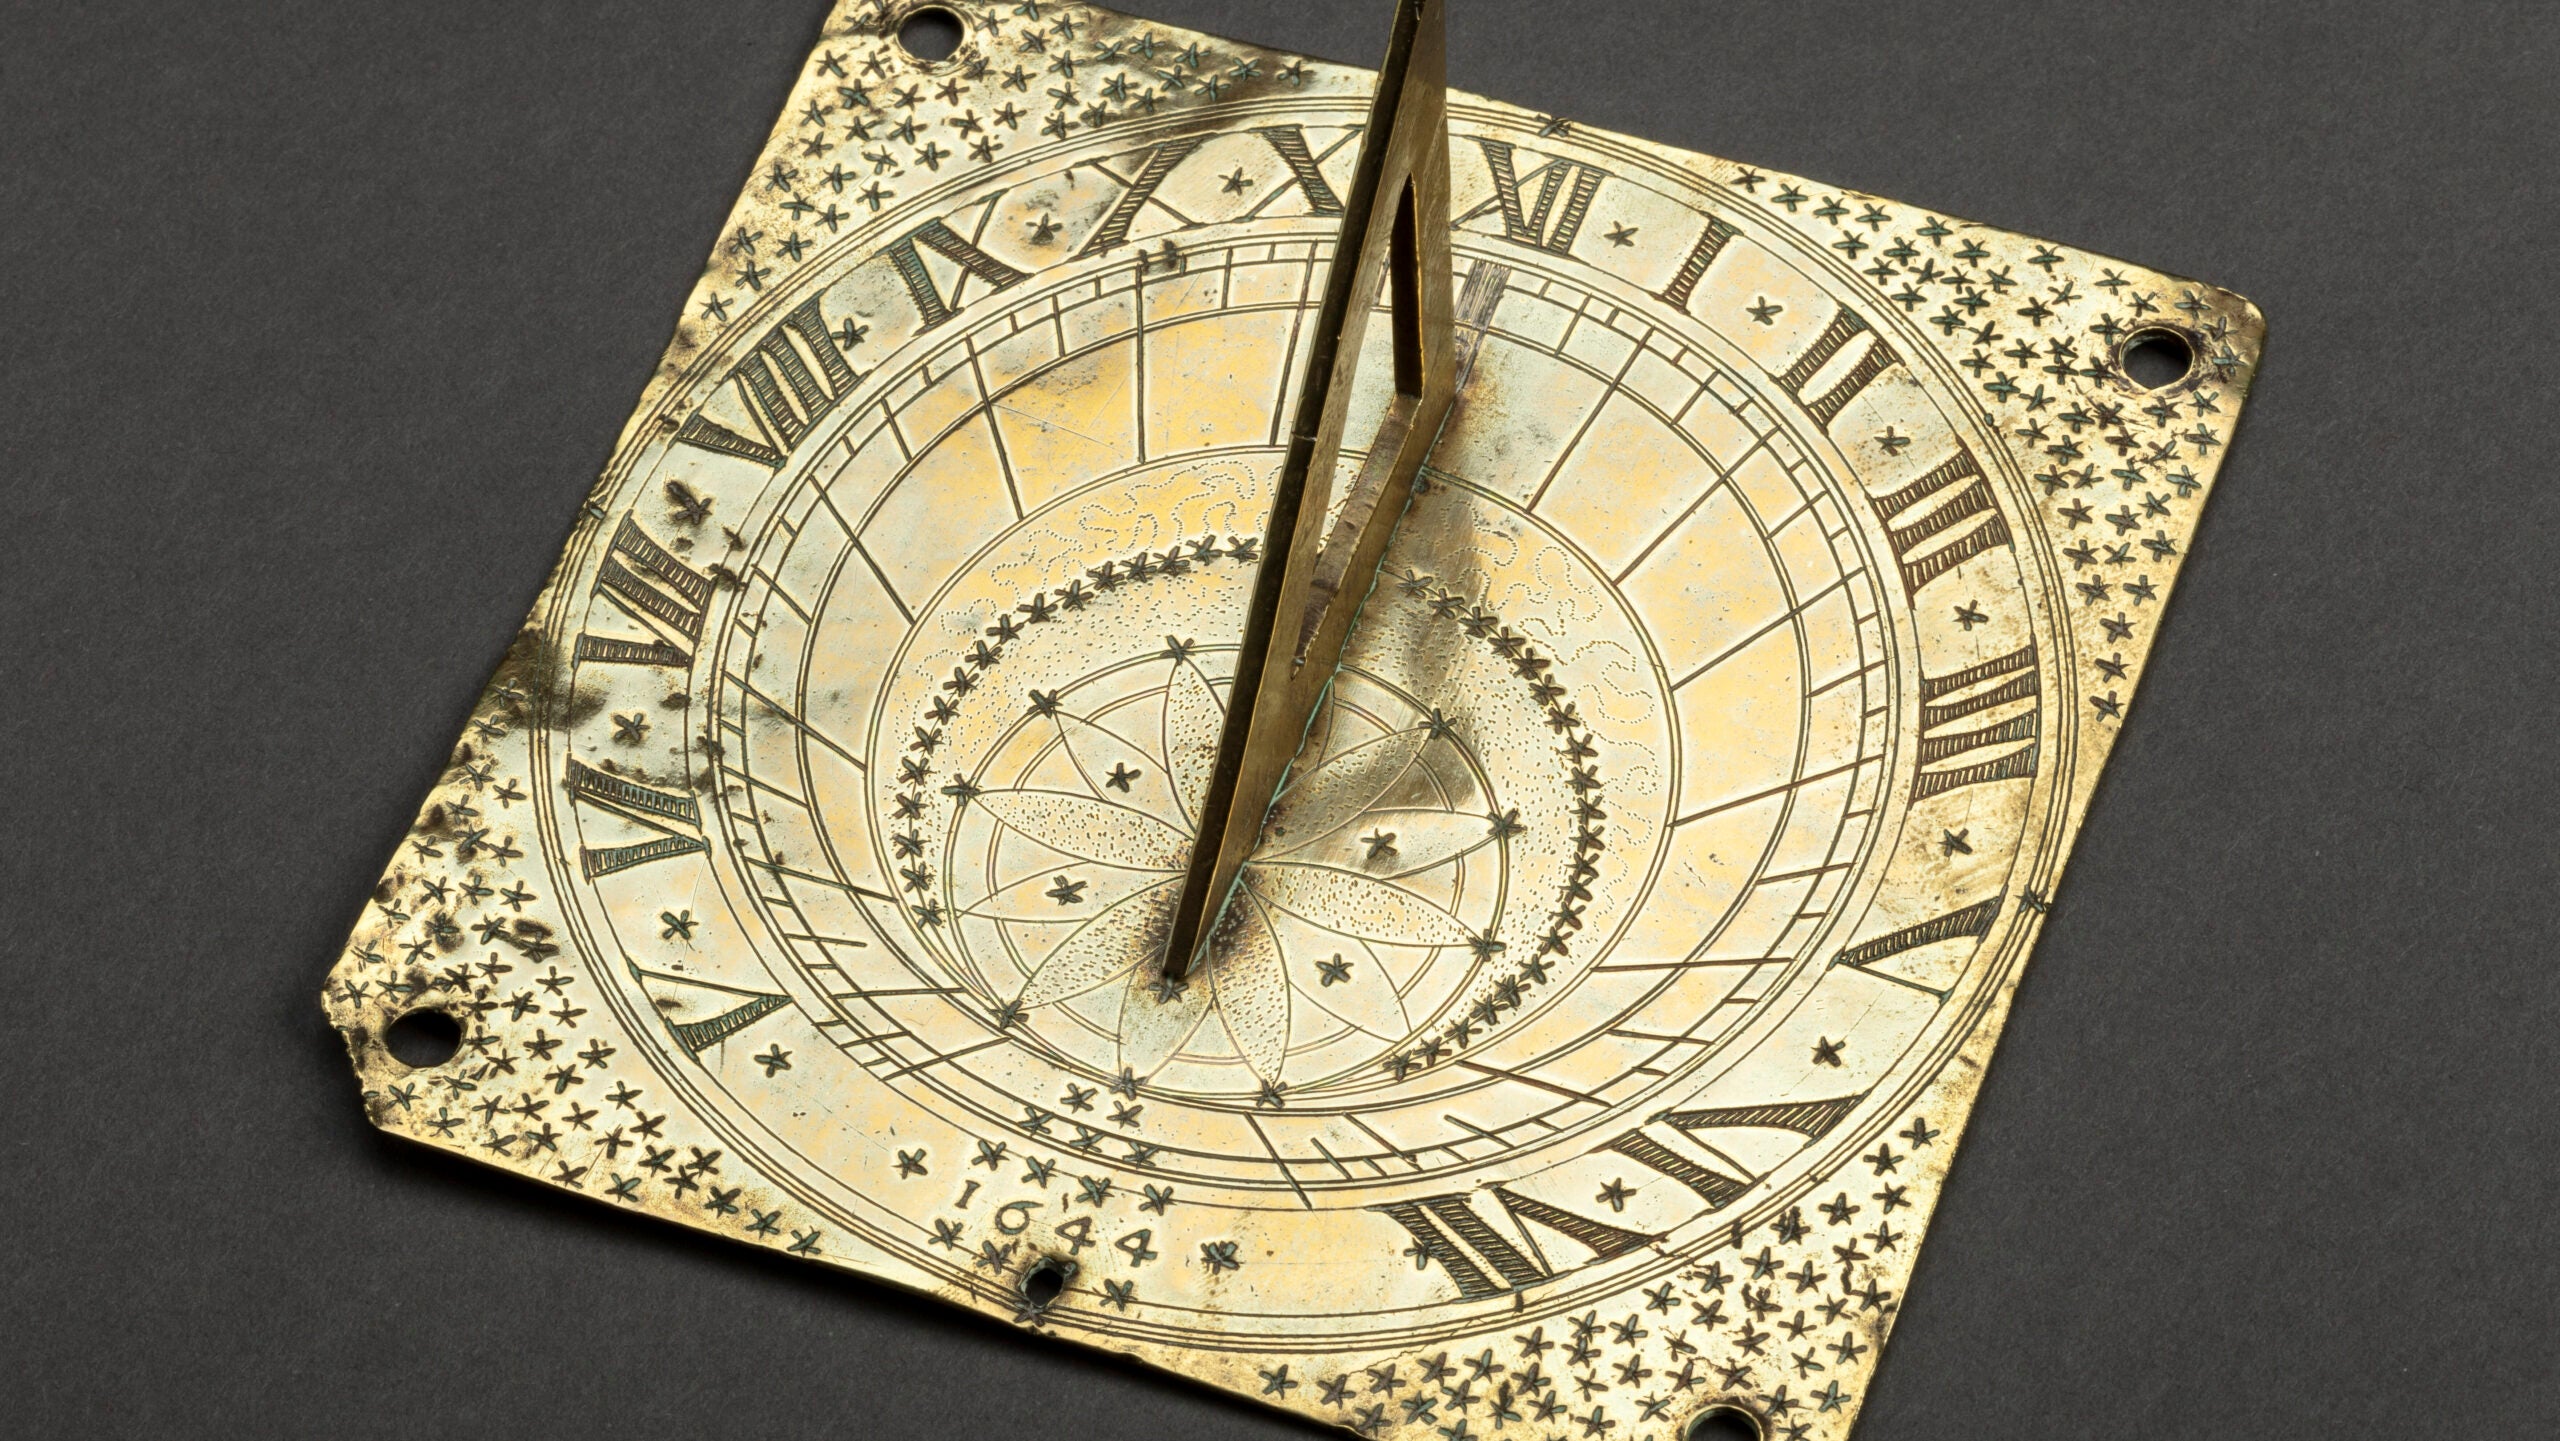 A gold sundial with roman numerals and stars from the Peabody Essex Museum sits on a grey background.